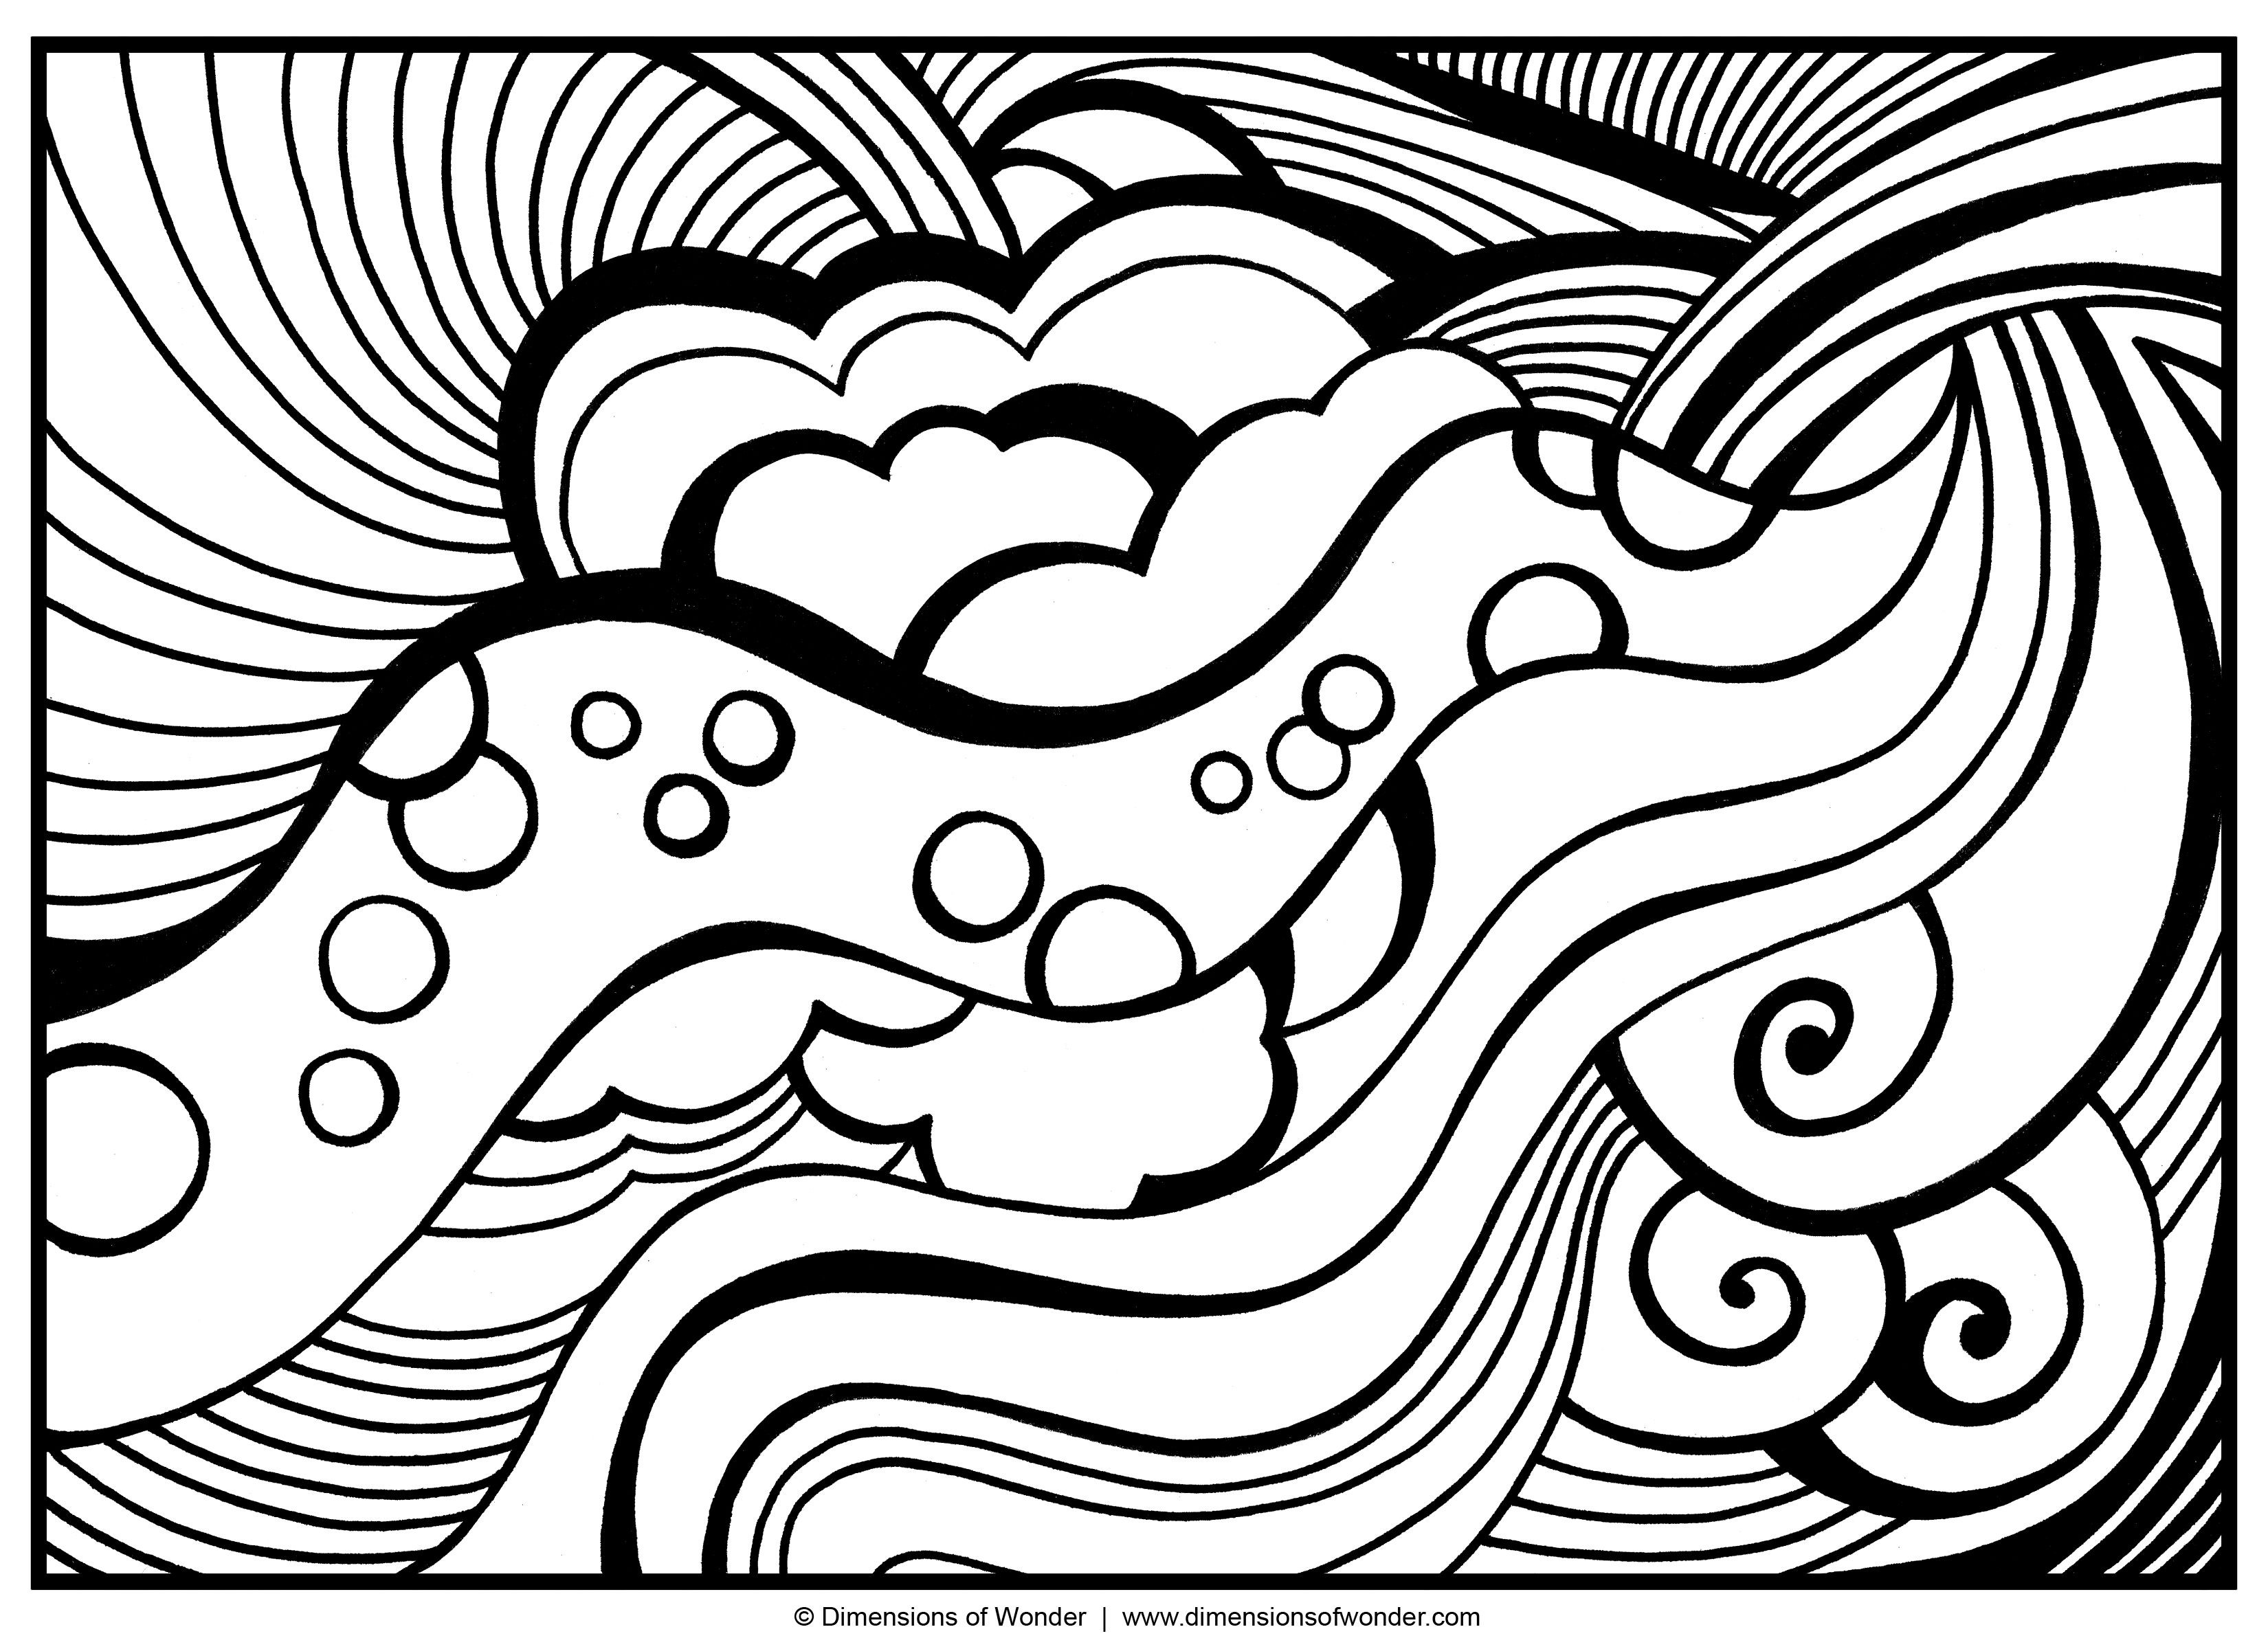 Coloring Pages For Adults Easy
 abstract coloring pages Free